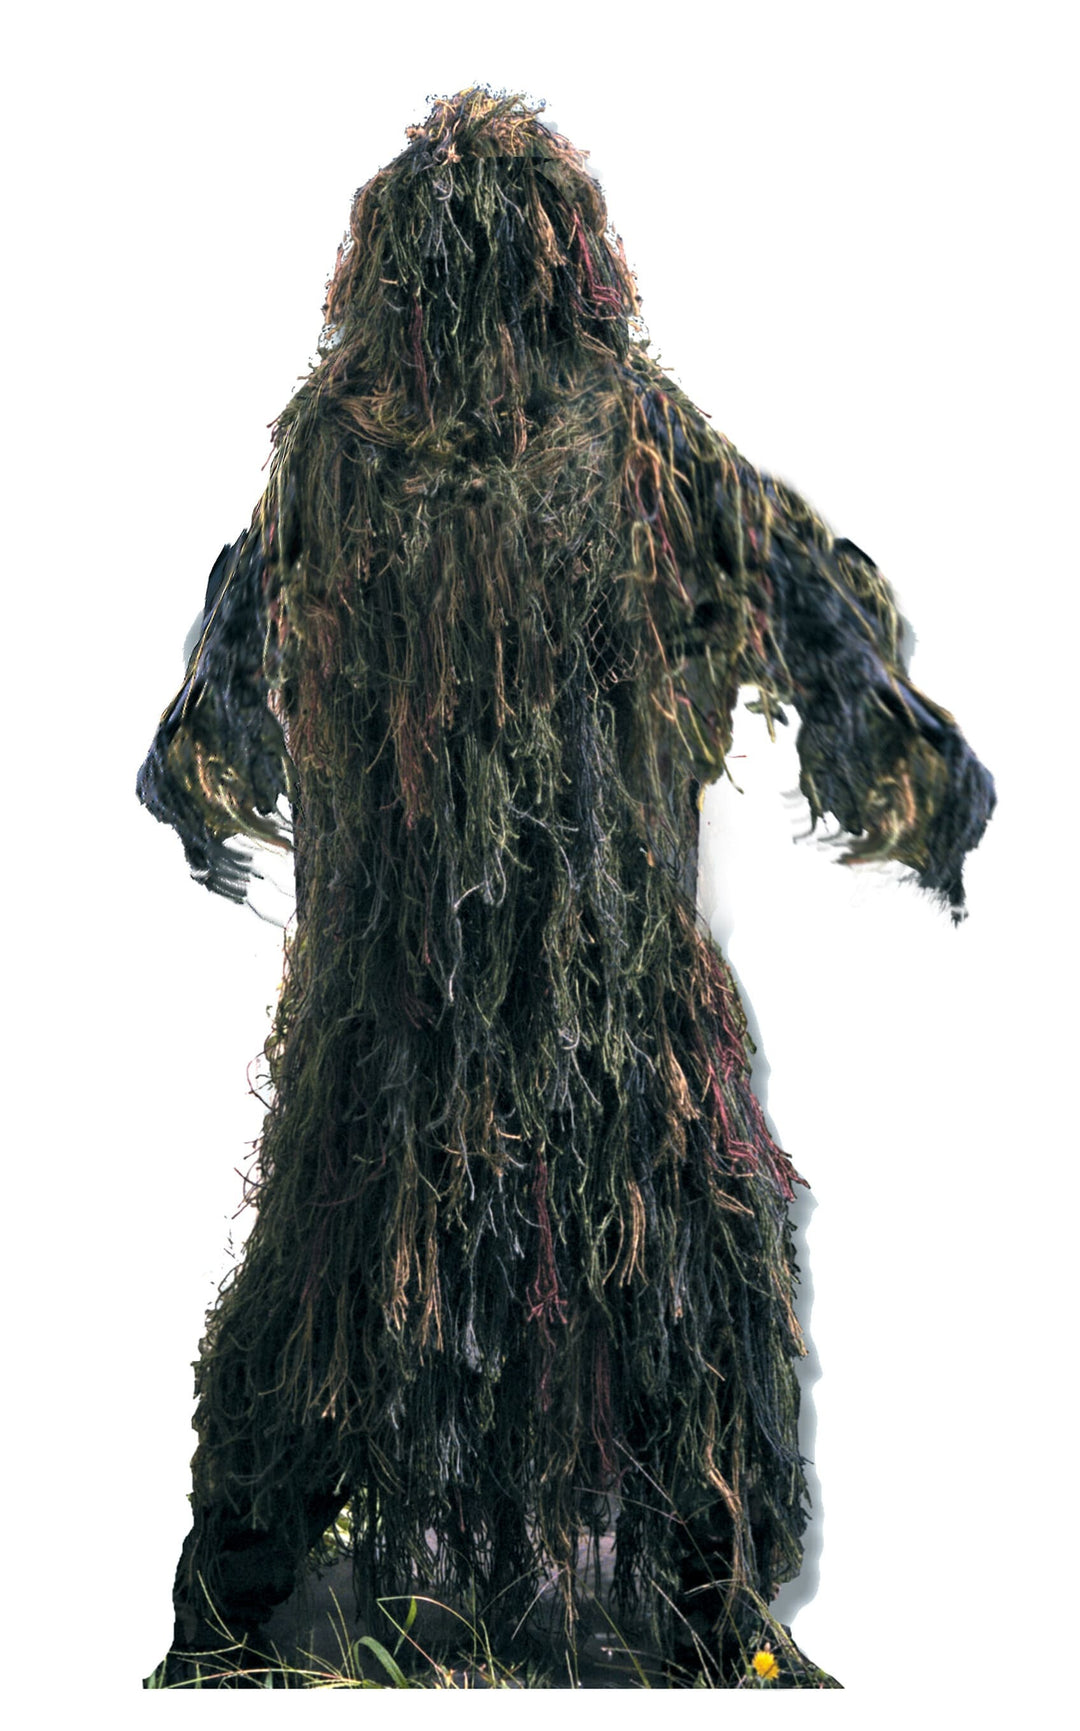 Rothco’s Kids Lightweight All Purpose Ghillie Suit